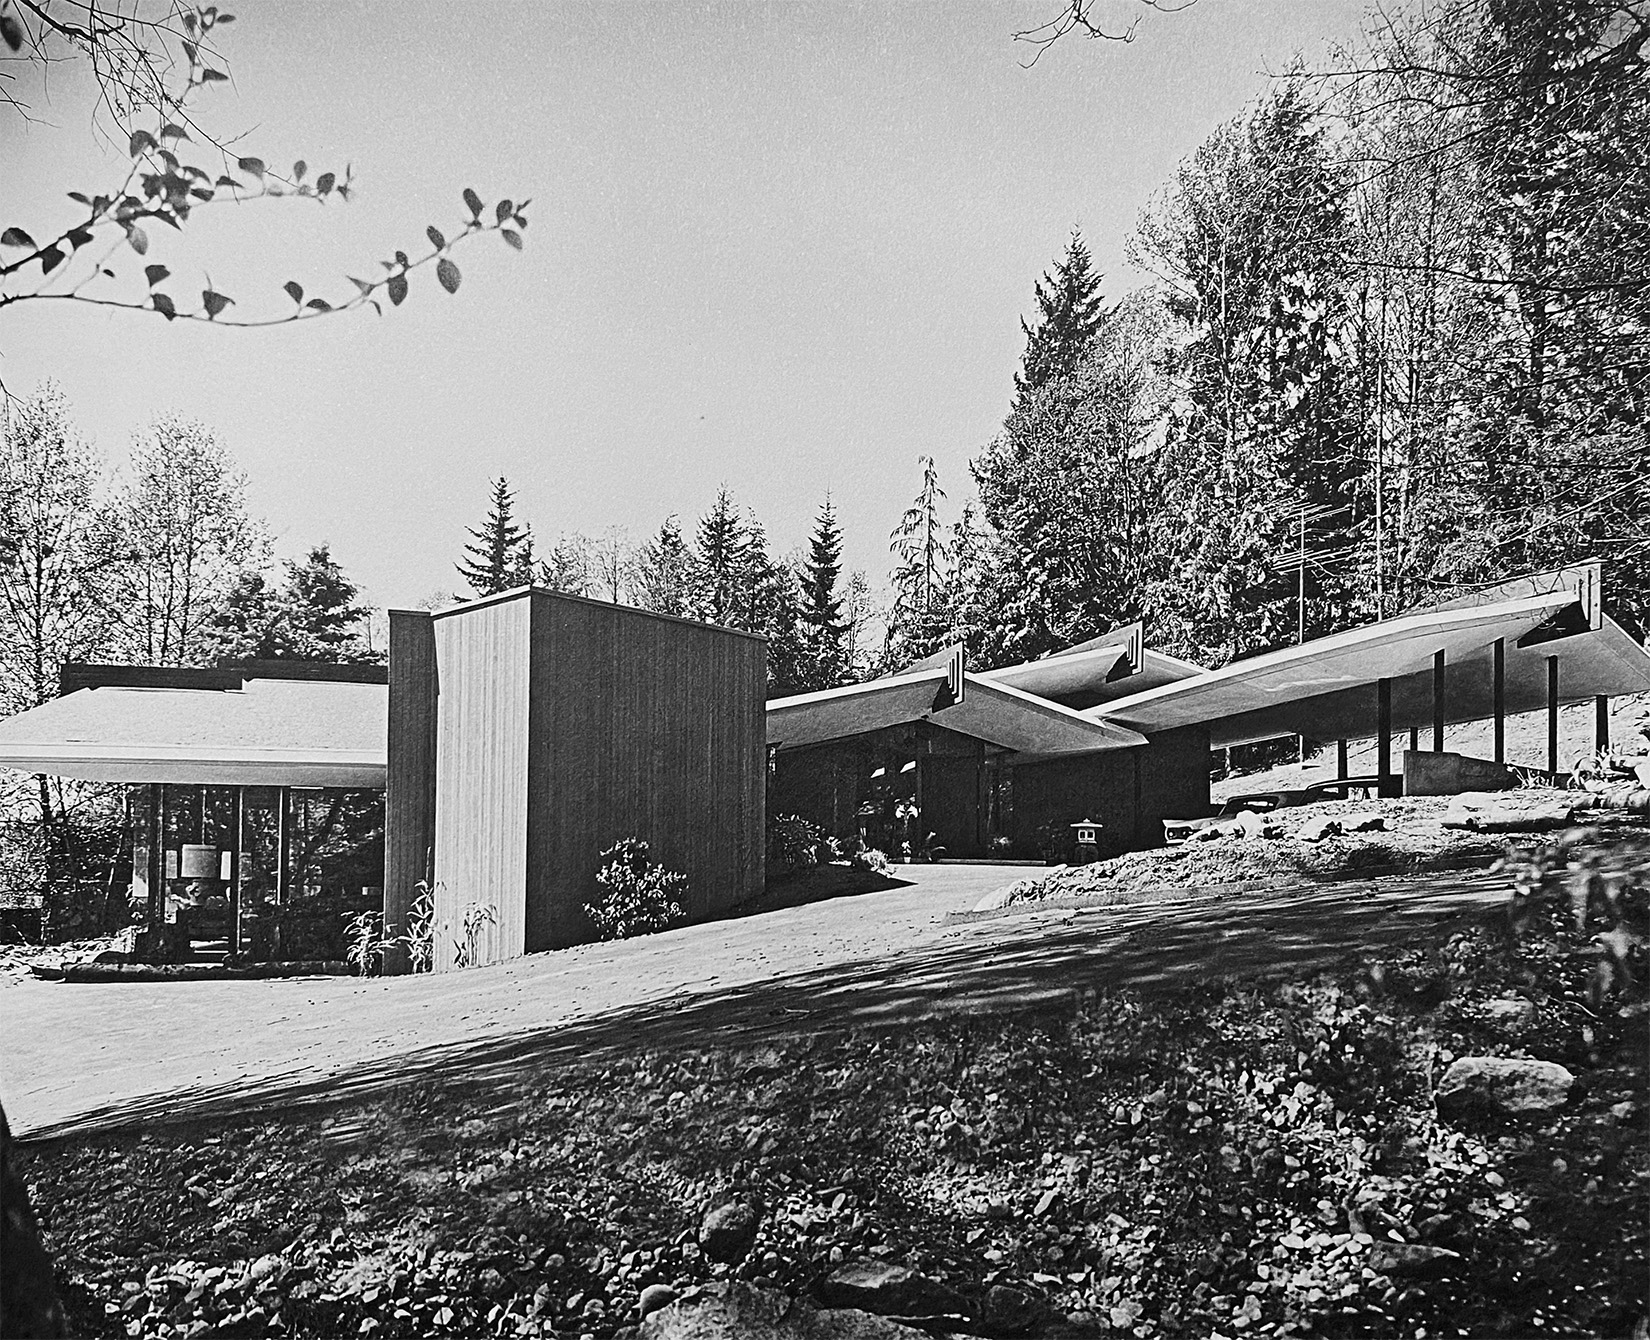 Forrest Residence, Thompson, Berwick, Pratt Architects, 1962-1963. Photo: Selwyn Pullan, 1962. Collection of West Vancouver Art Museum.